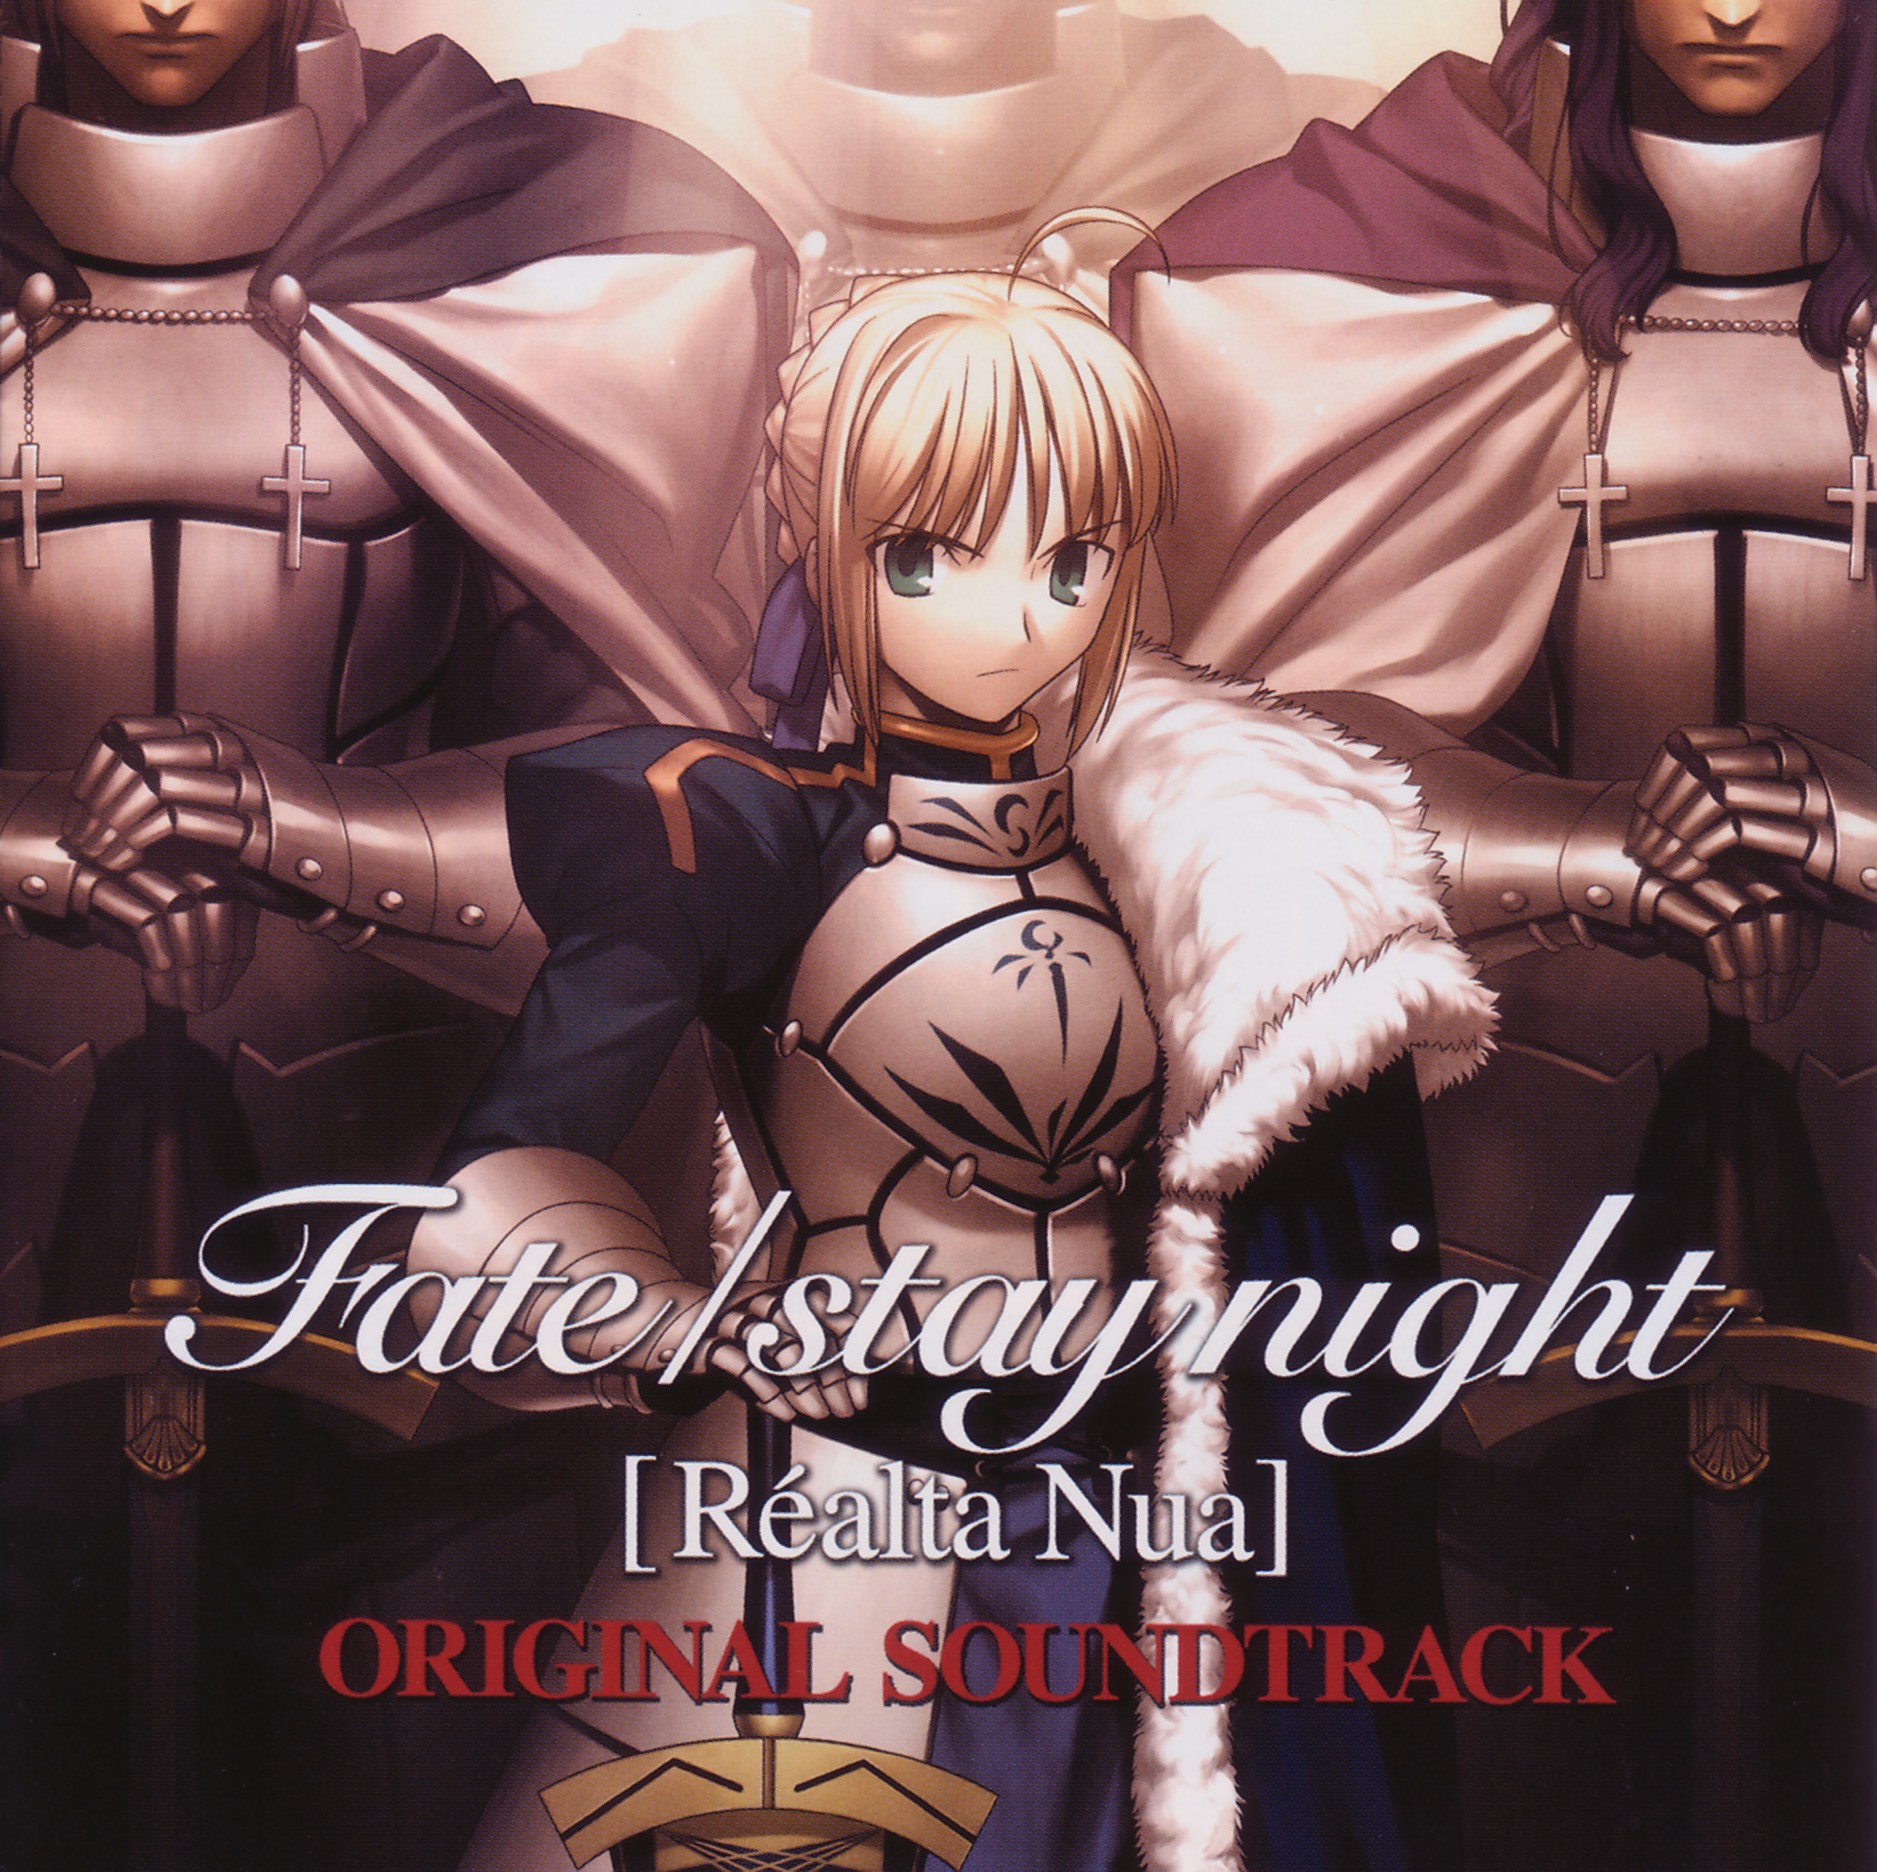 Fate/stay night [Réalta Nua] ORIGINAL SOUNDTRACK [Limited Edition] (2007)  MP3 - Download Fate/stay night [Réalta Nua] ORIGINAL SOUNDTRACK [Limited  Edition] (2007) Soundtracks for FREE!